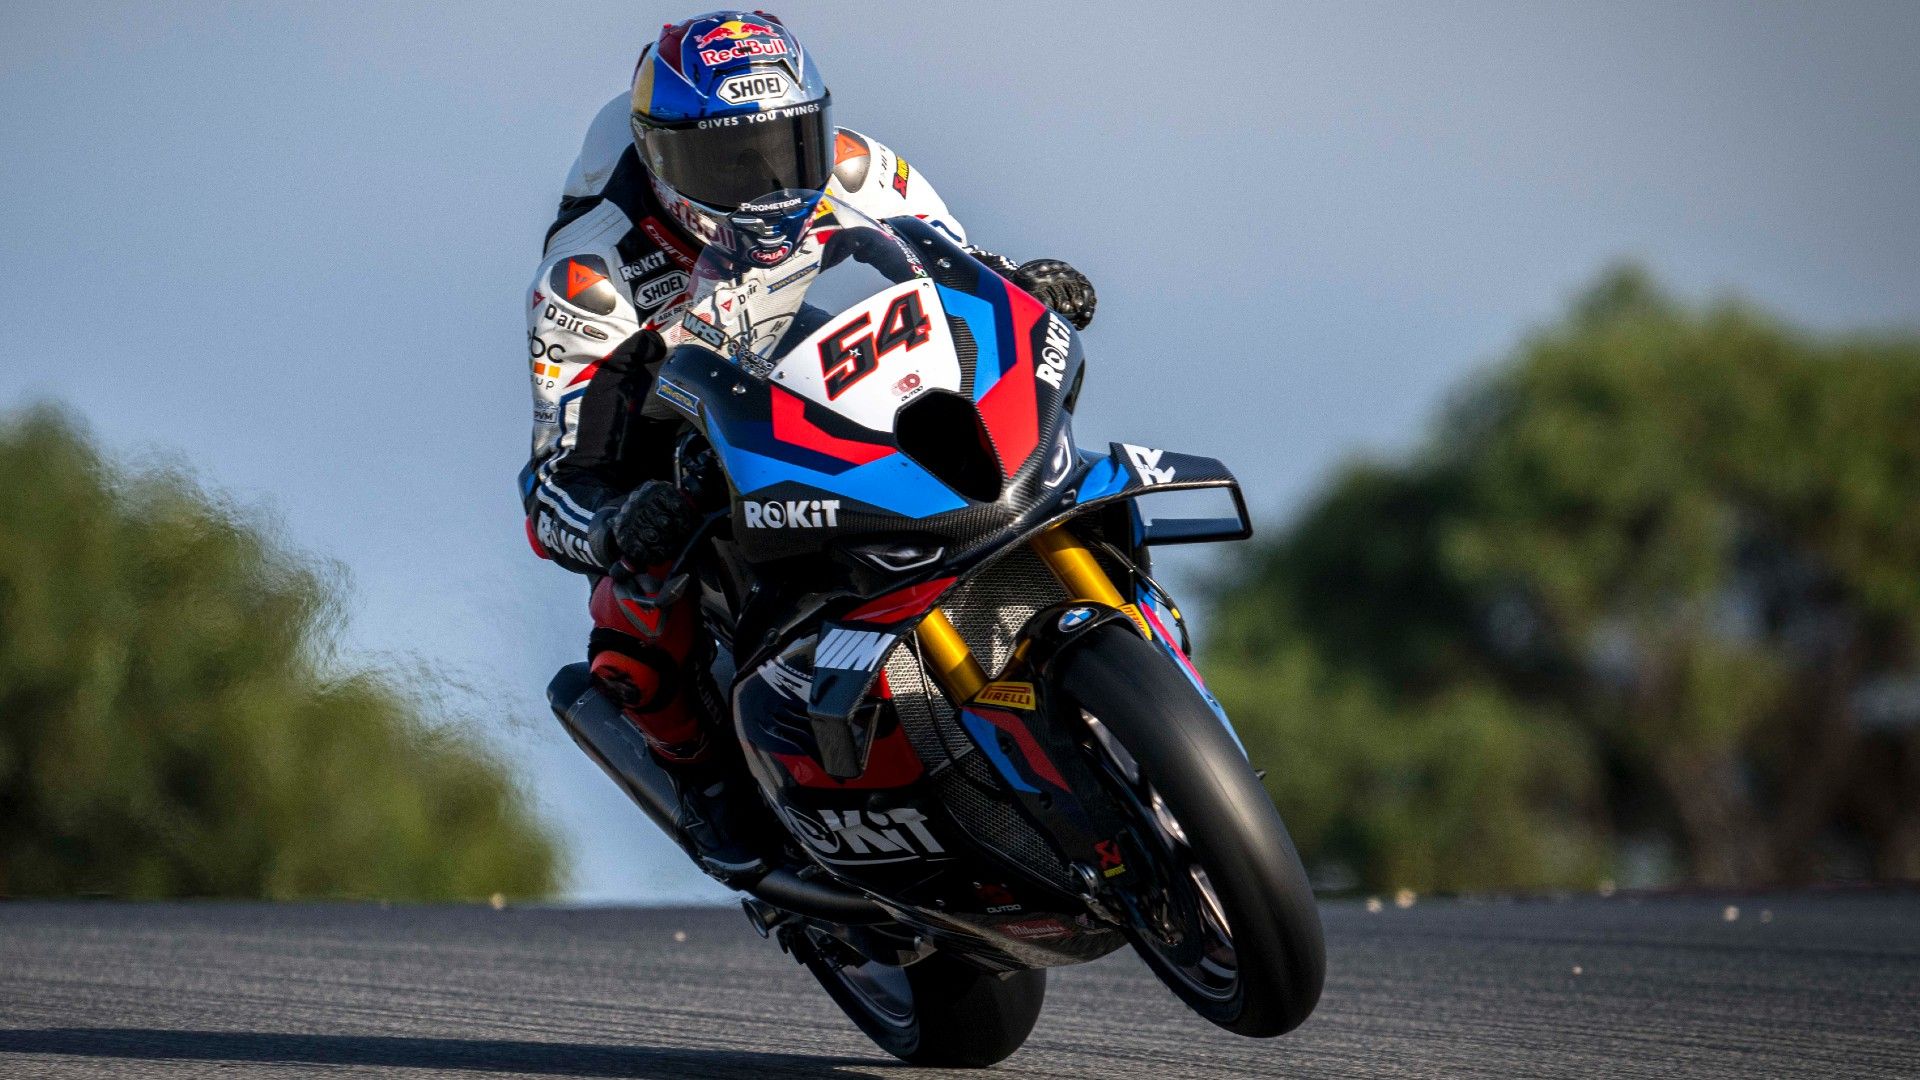 key things you should know before riding a 200-hp superbike